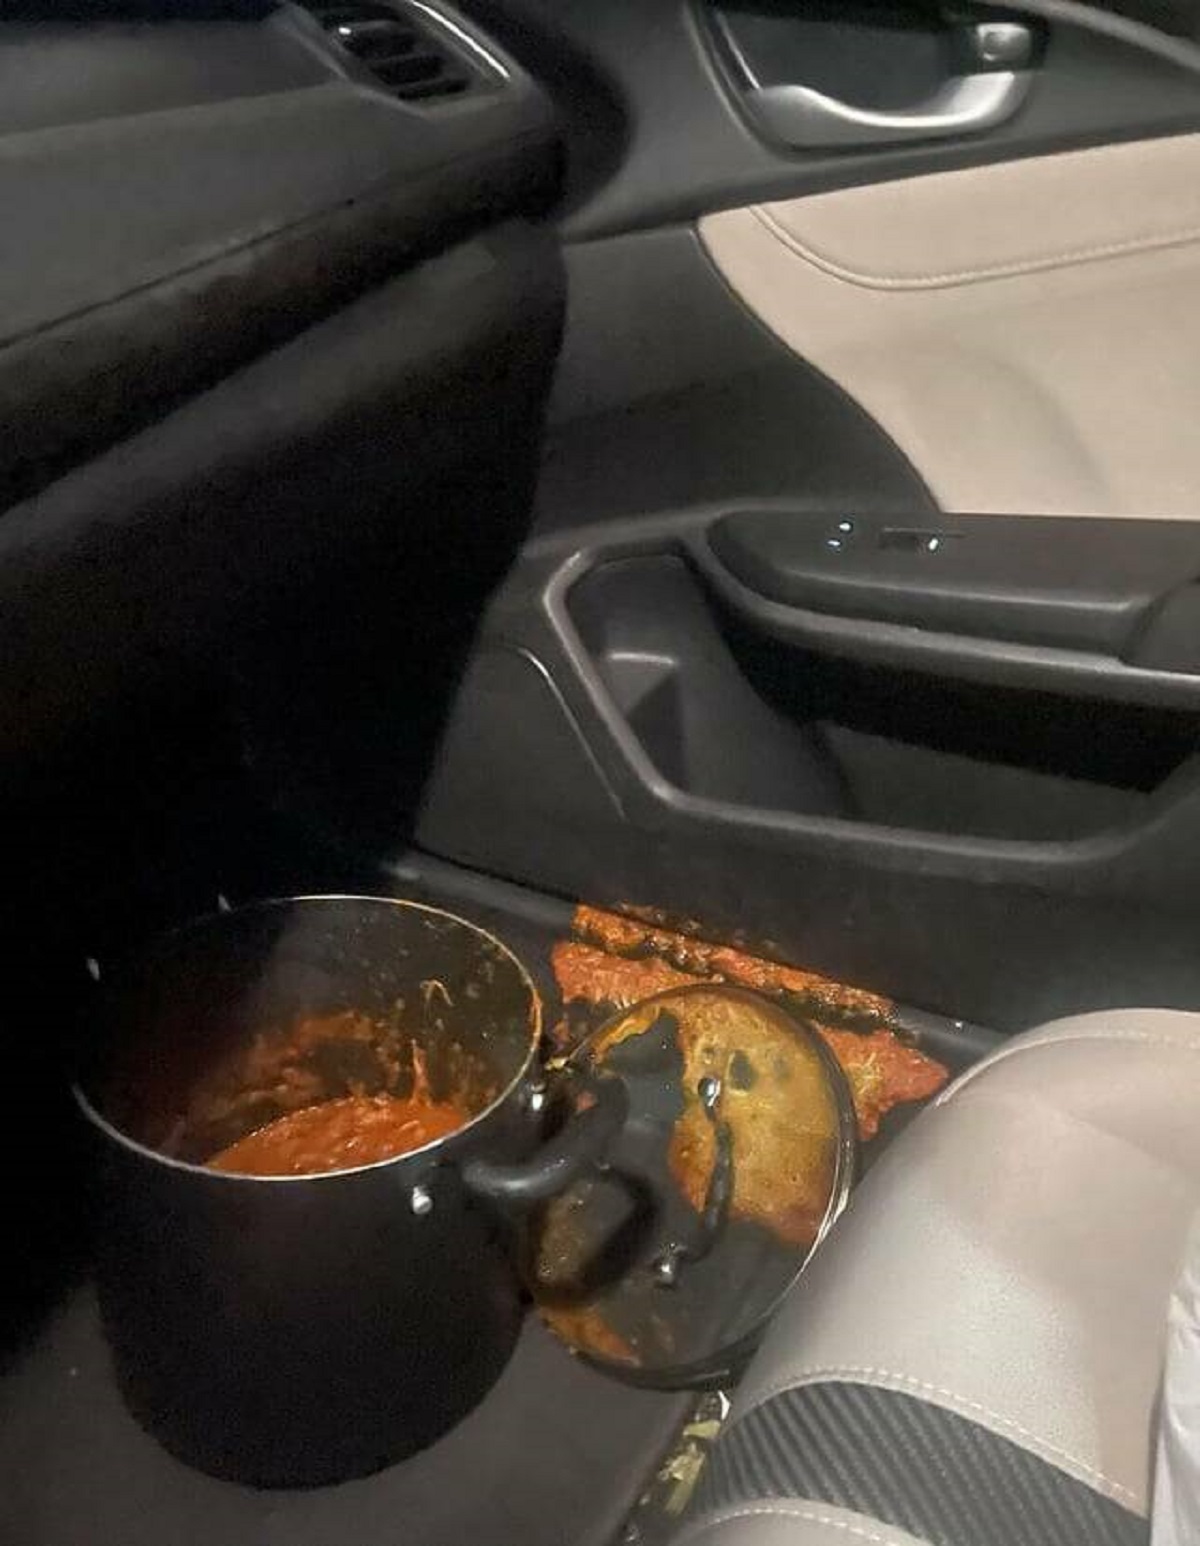 "I accidentally spilled Tinga in my new car."